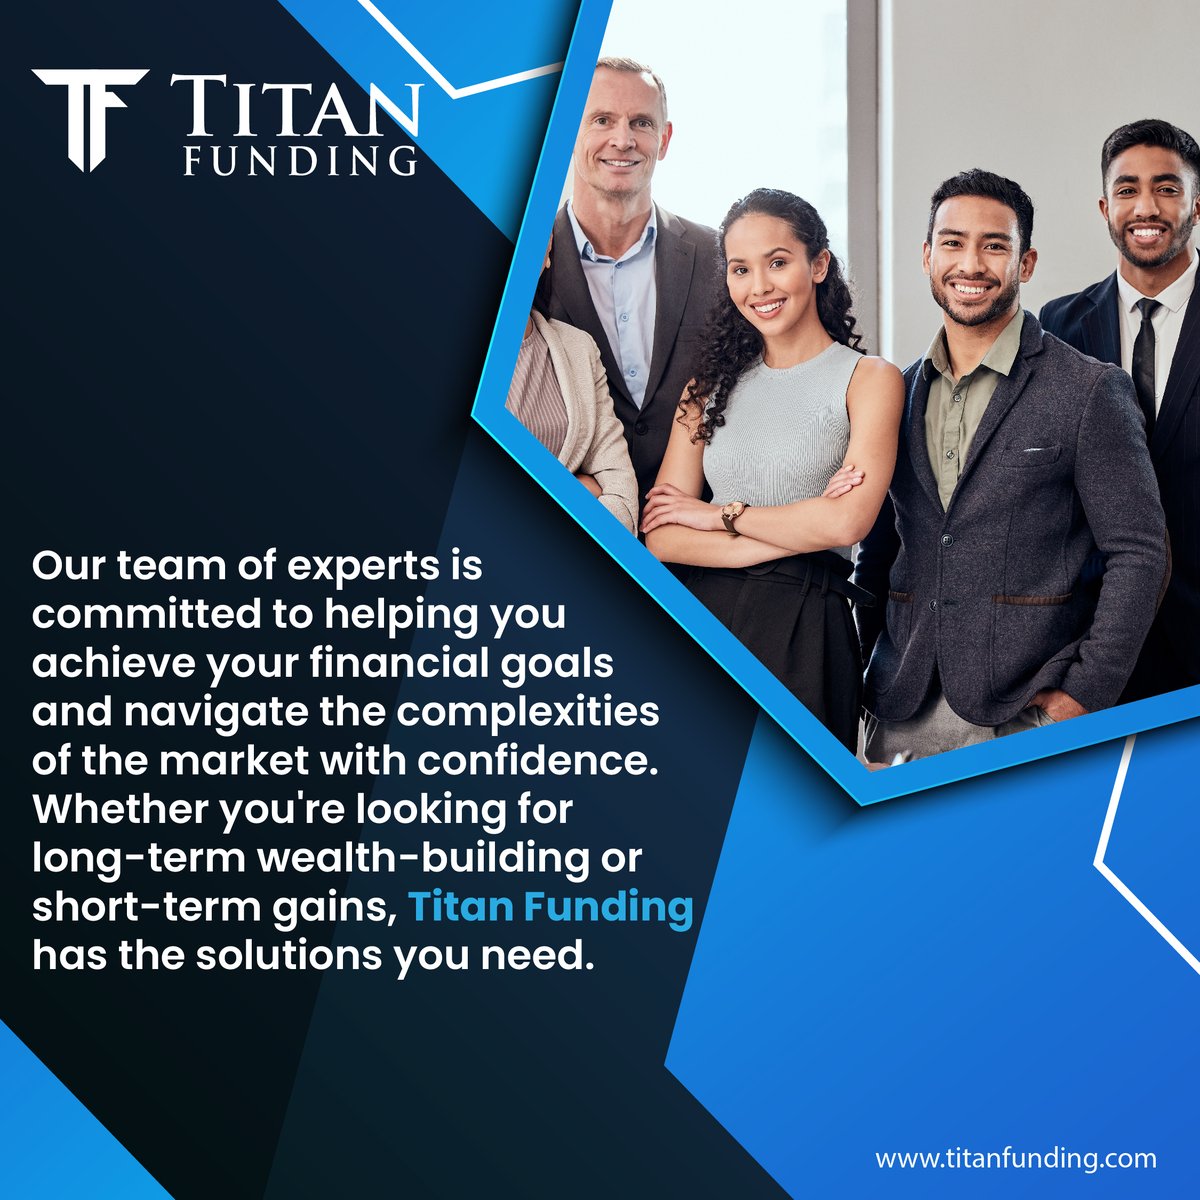 Start building your passive income streams and unlock the potential of real estate investing with Titan Funding. 

titanfunding.com

#TitanFunding #PassiveIncome #FinancialFreedom #InvestmentStrategies #RealEstateInvesting